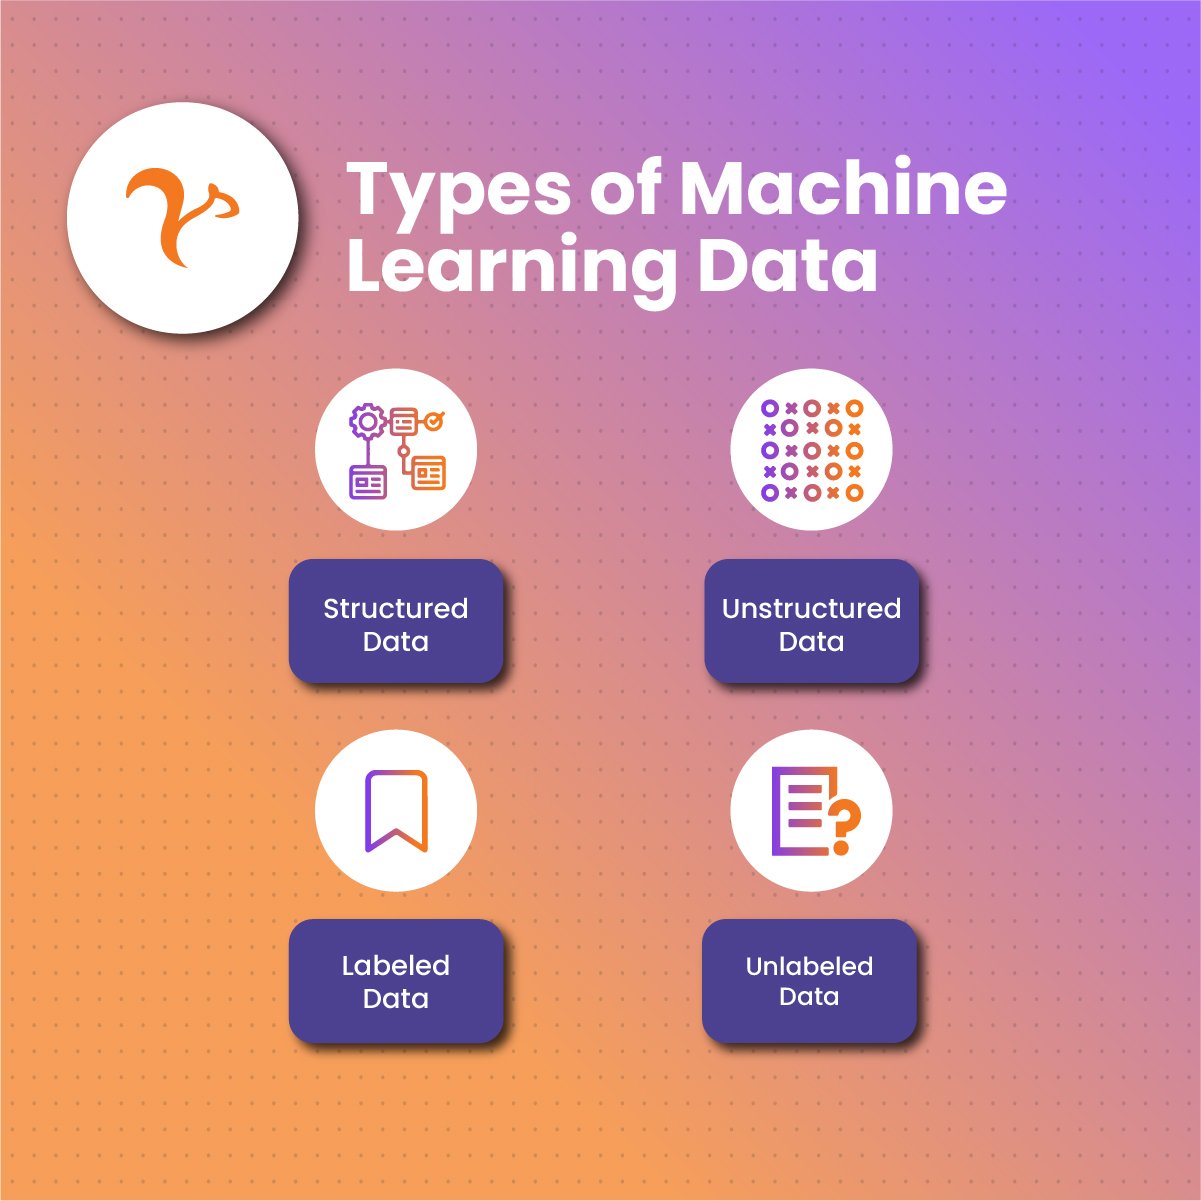 Types of Machine Learning Data